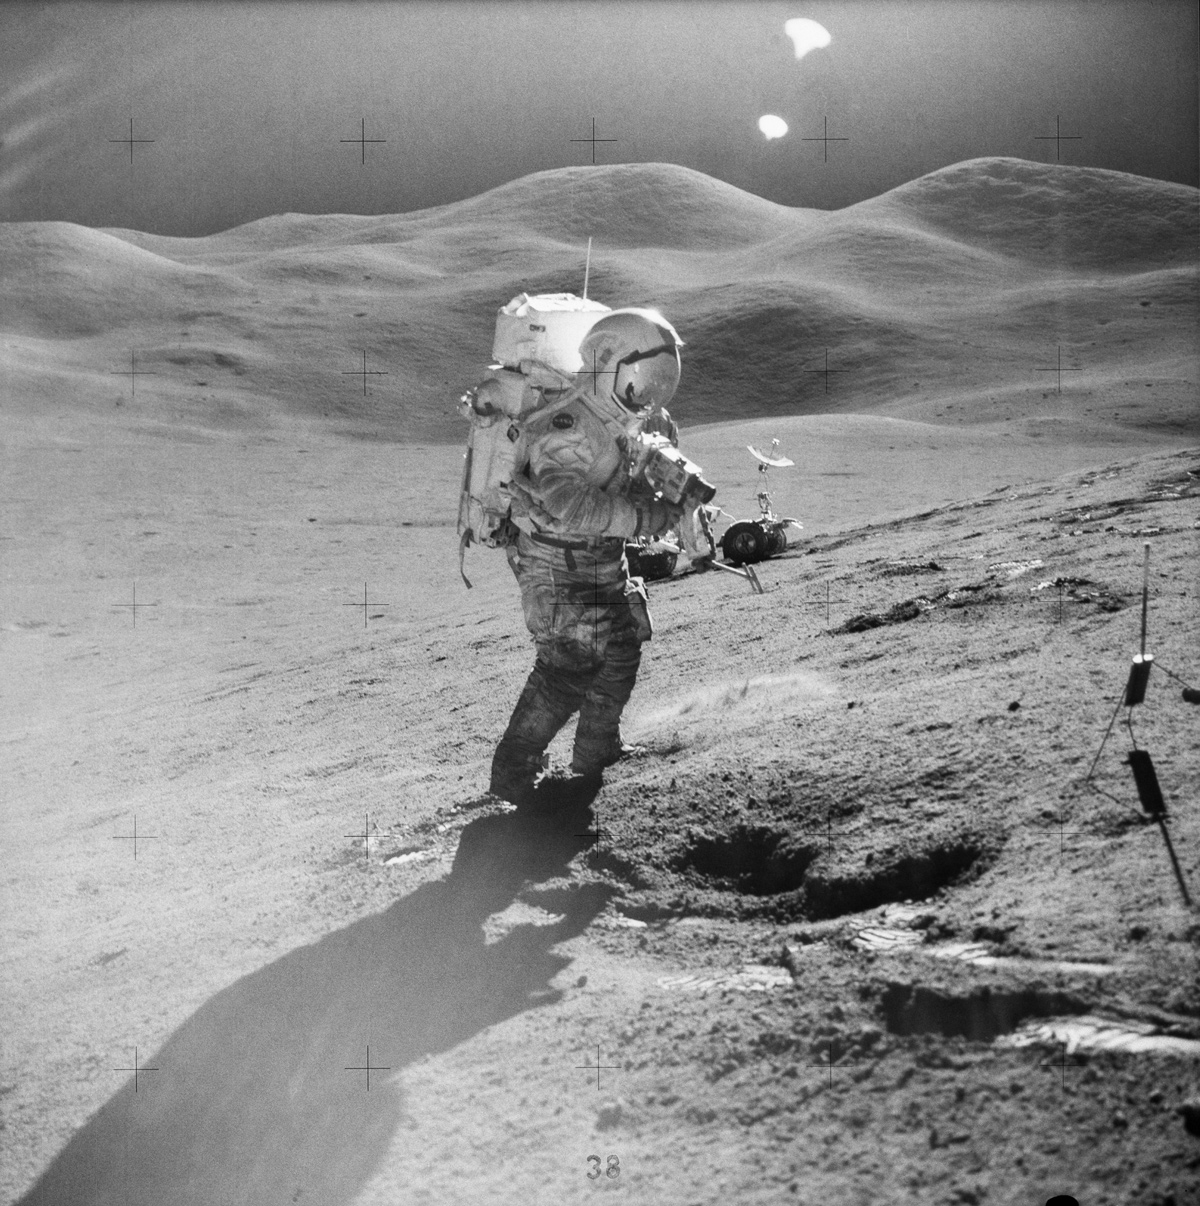 Astronaut on the lunar surface, taking a photograph. Rolling hills line the horizon in the background.